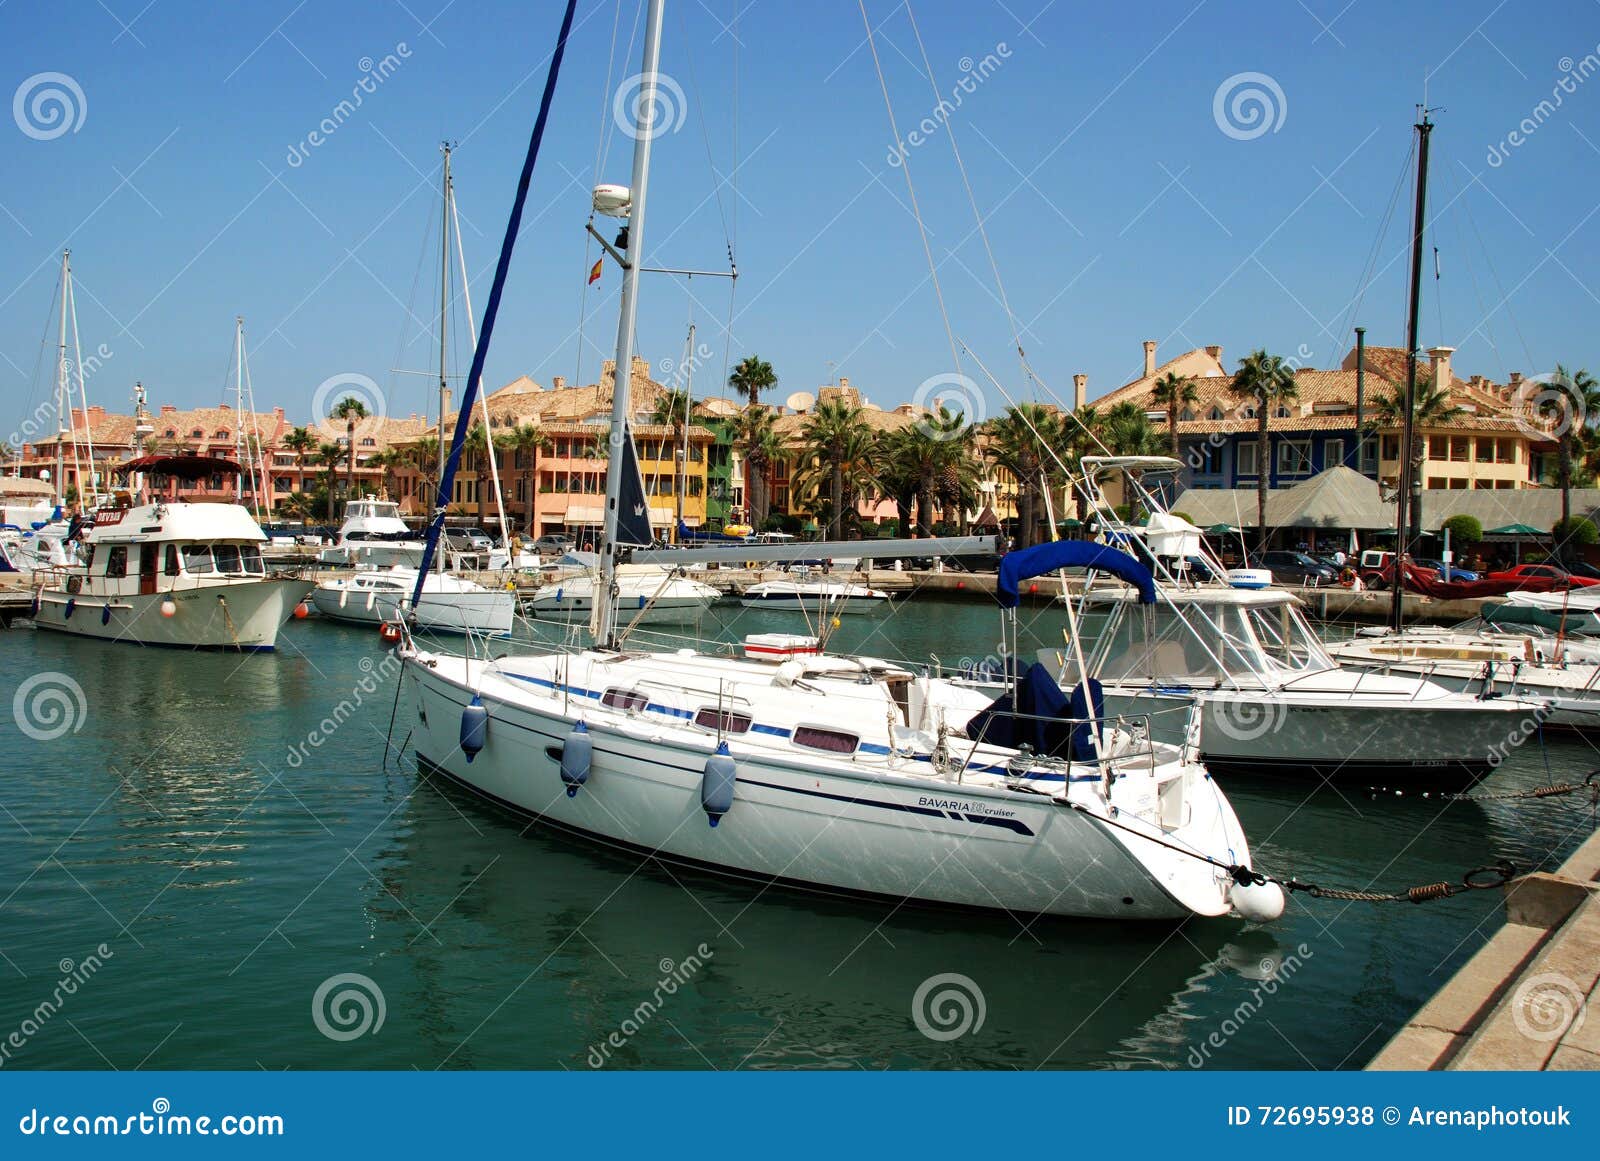 Yachts in Sotogrande Marina. Editorial Stock Photo - Image of andalusia ...